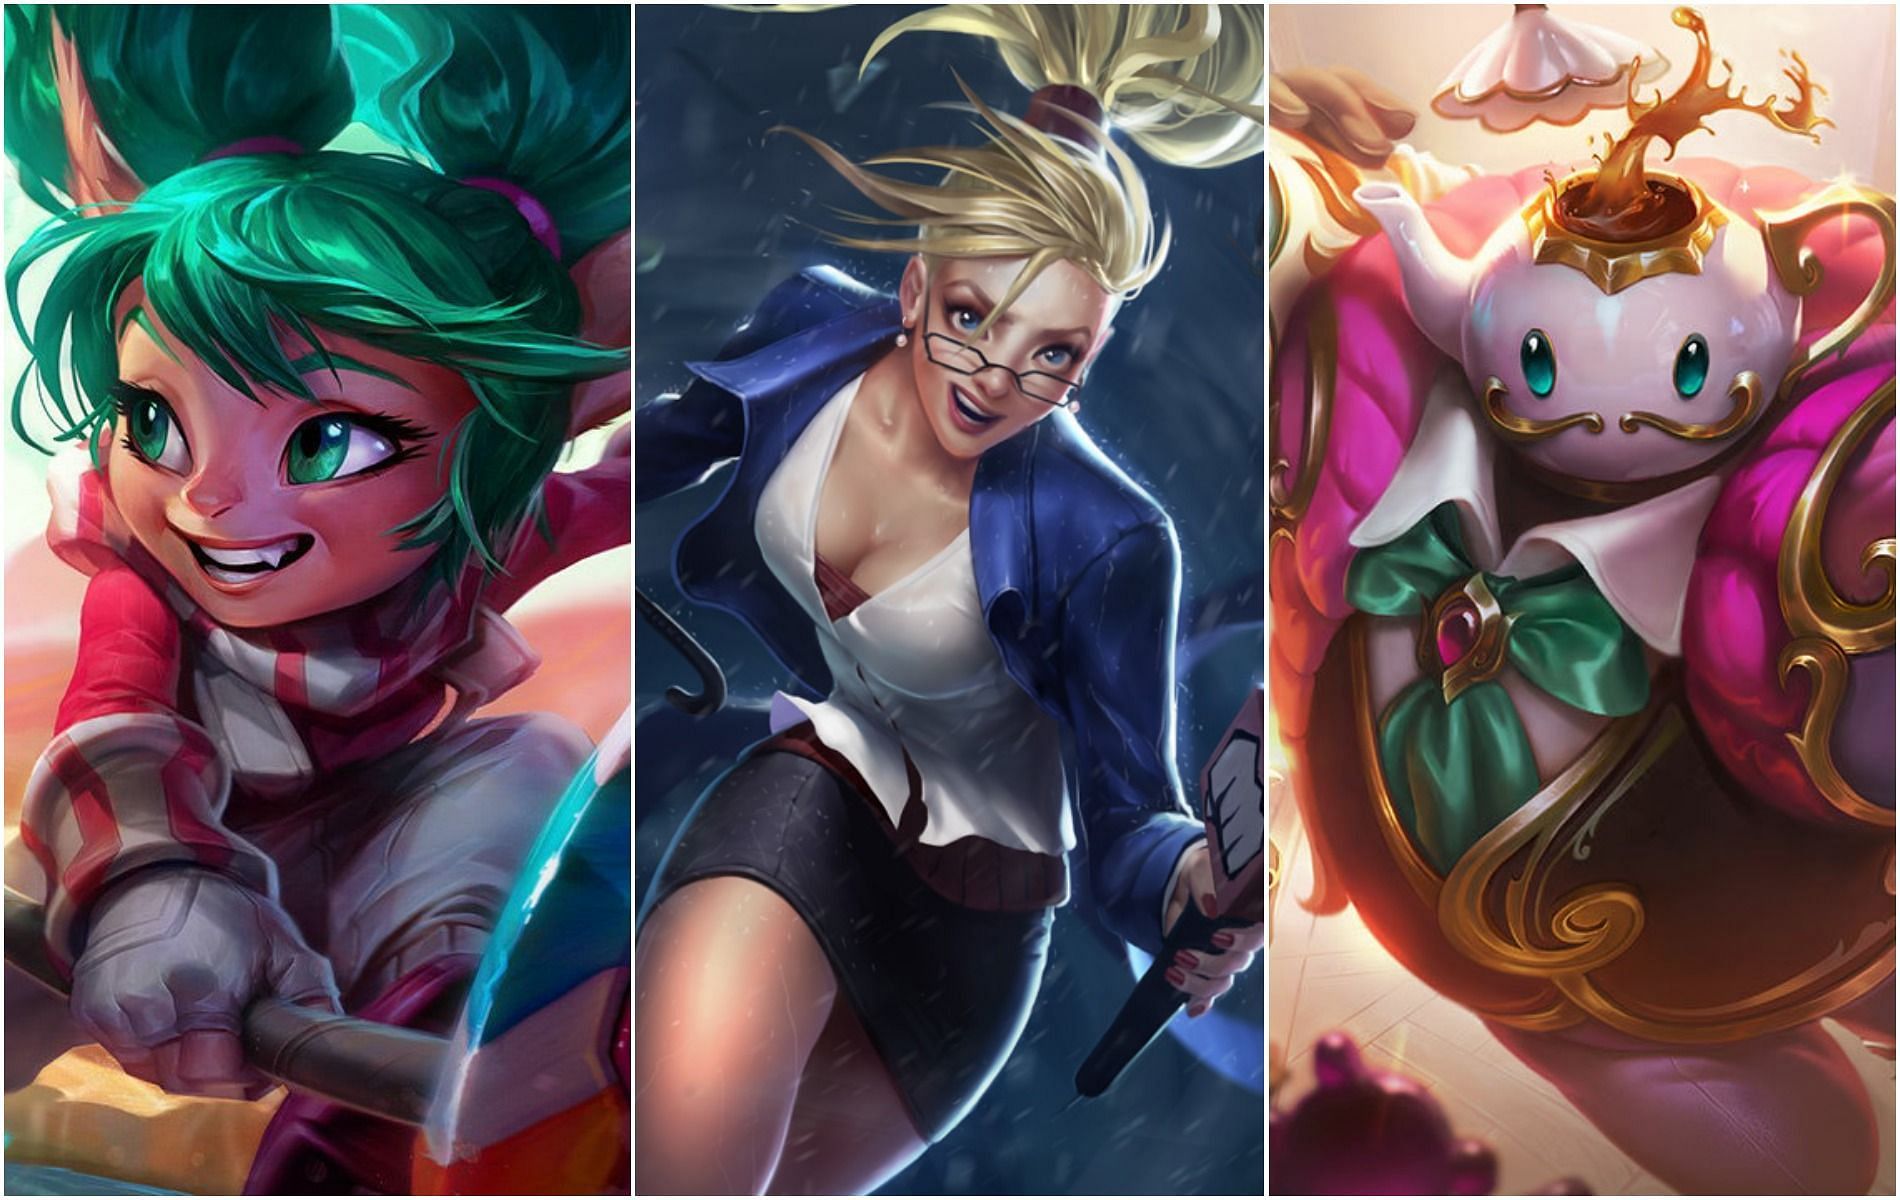 More supports succeed Janna is exploit the new League of Legends Bounty system (Images via Riot Games)